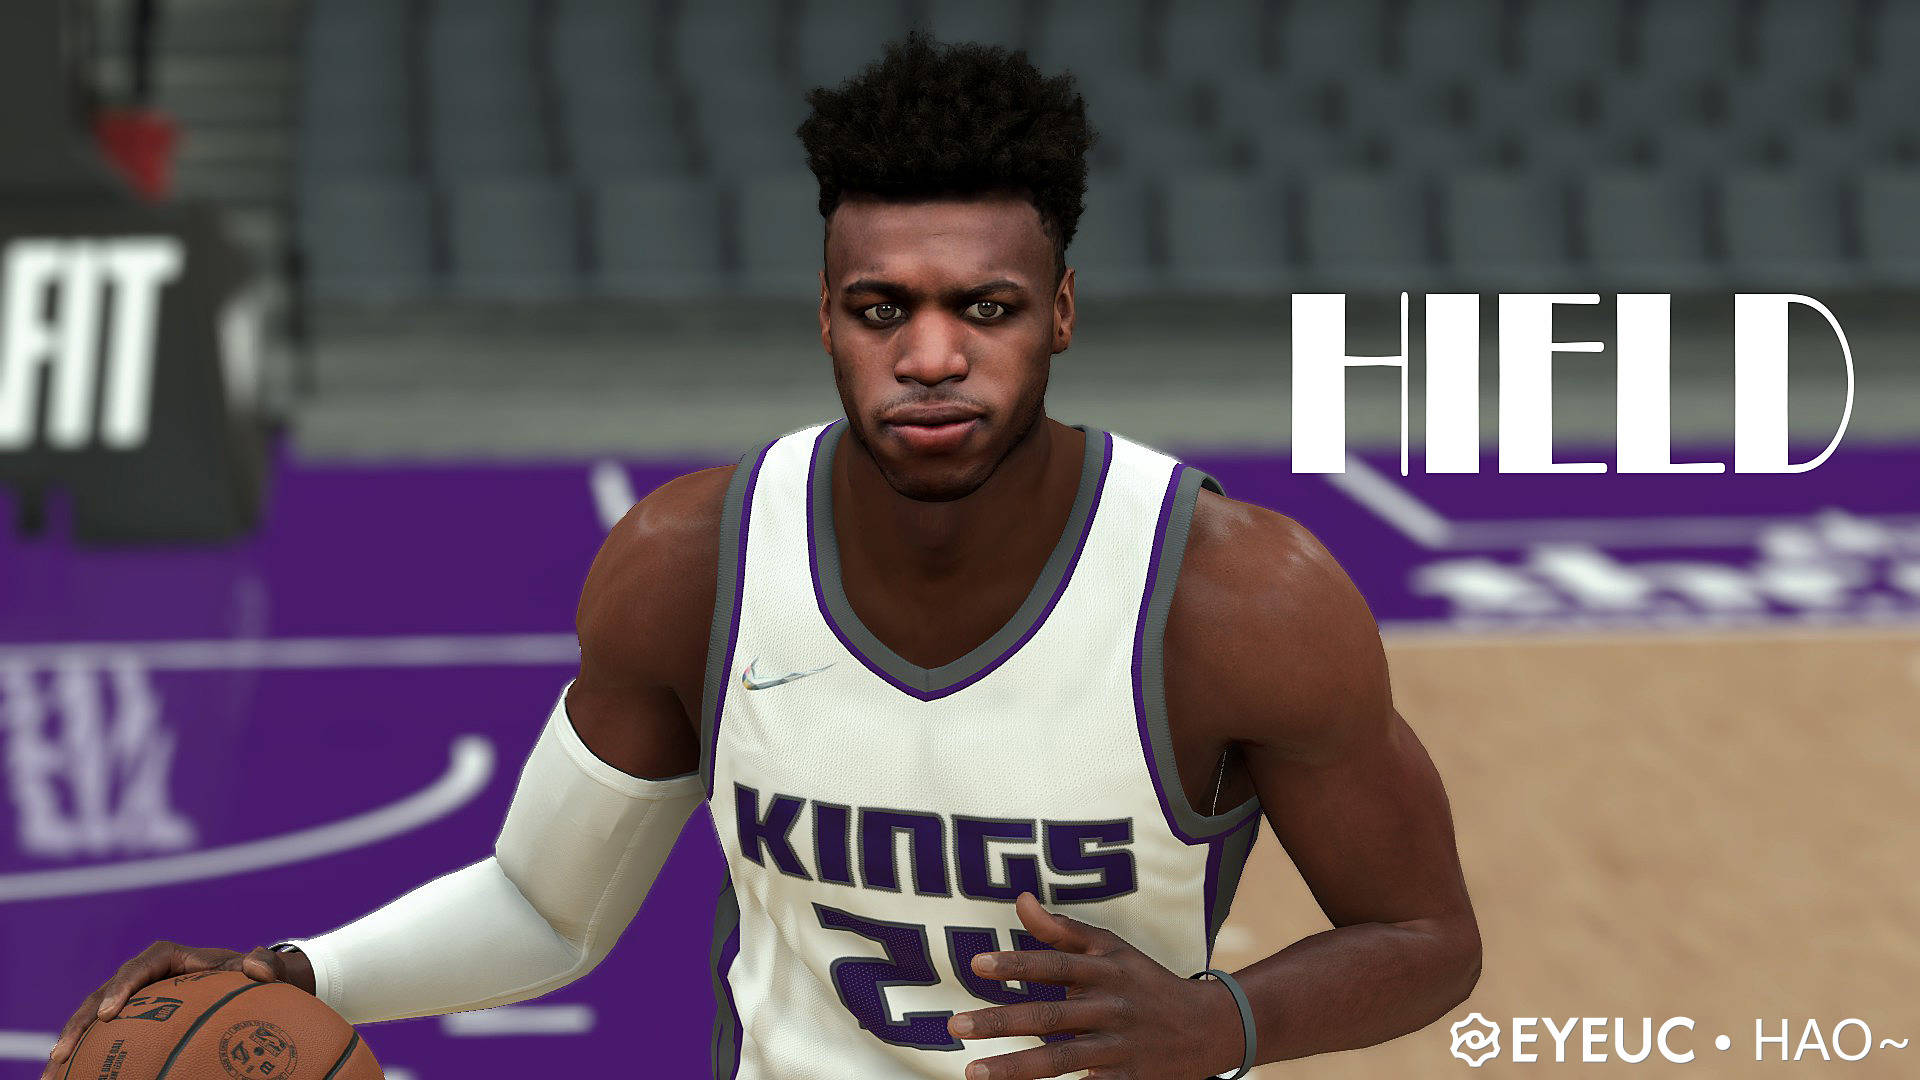 Nba Star Buddy Hield In Action